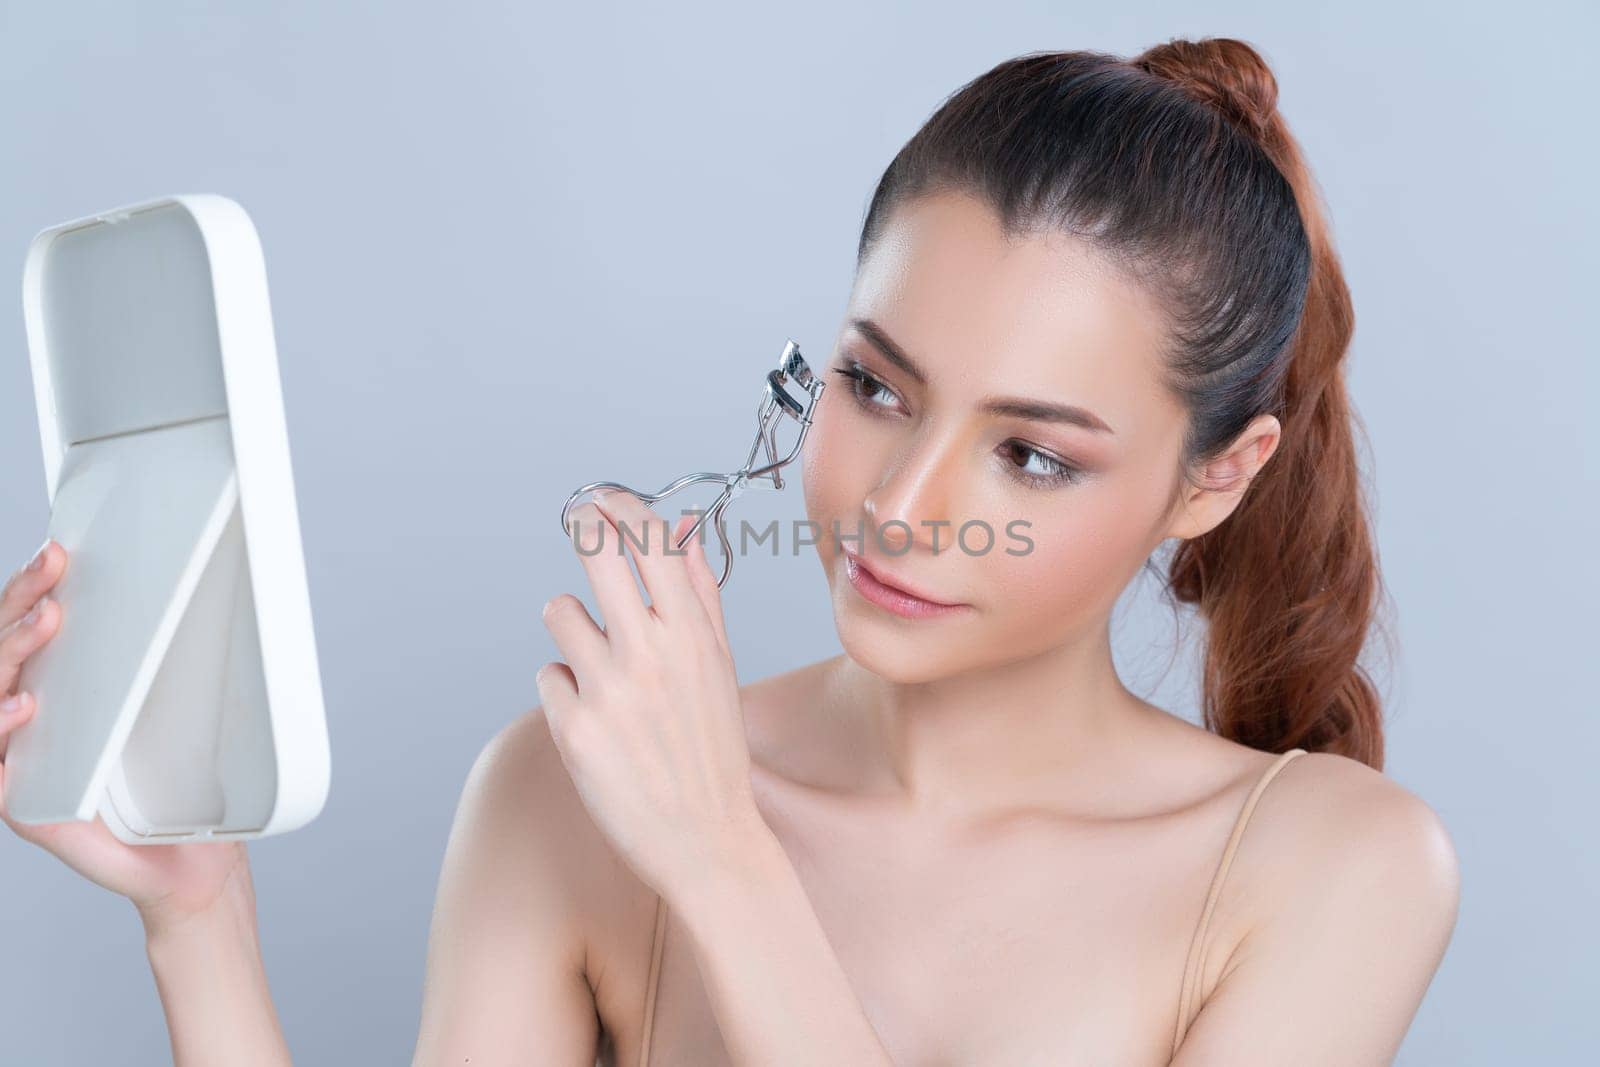 Closeup glamorous facial makeup, beautiful woman with perfect smooth cosmetic clean skin correct eyelash curler with metal mechanic beauty accessory in isolated background.